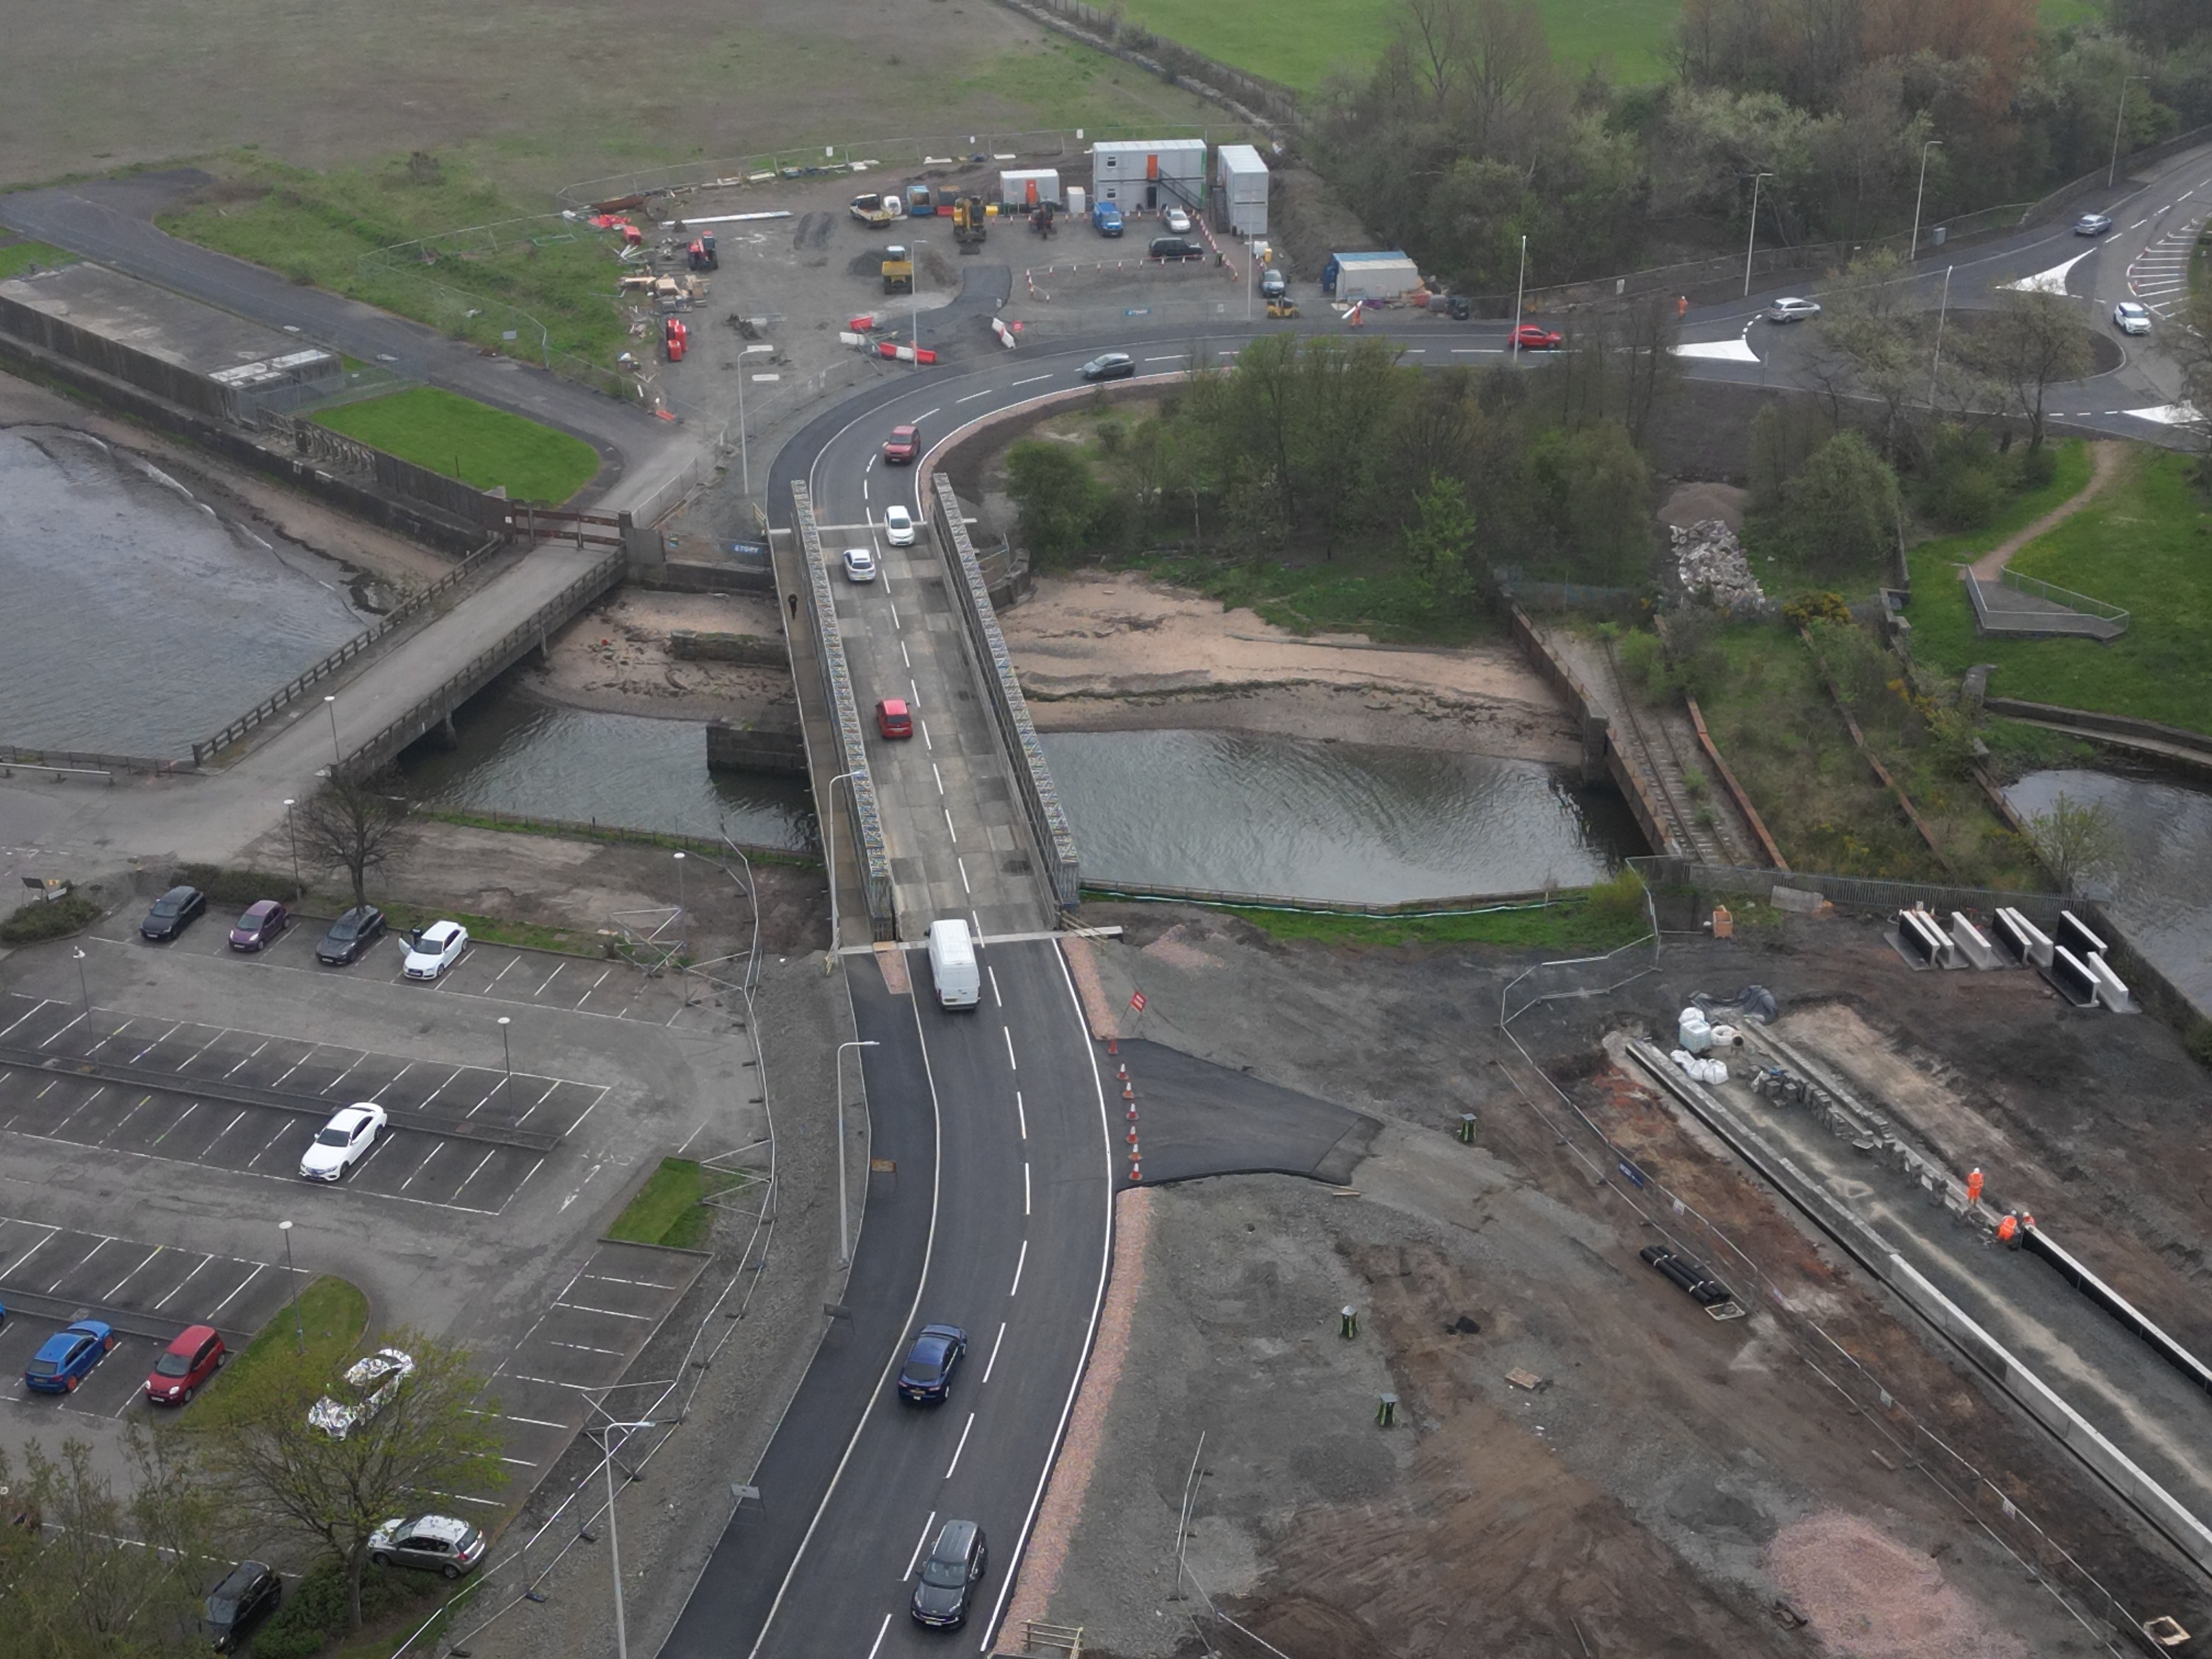 Traffic on newly opened temporary bridge in Leven